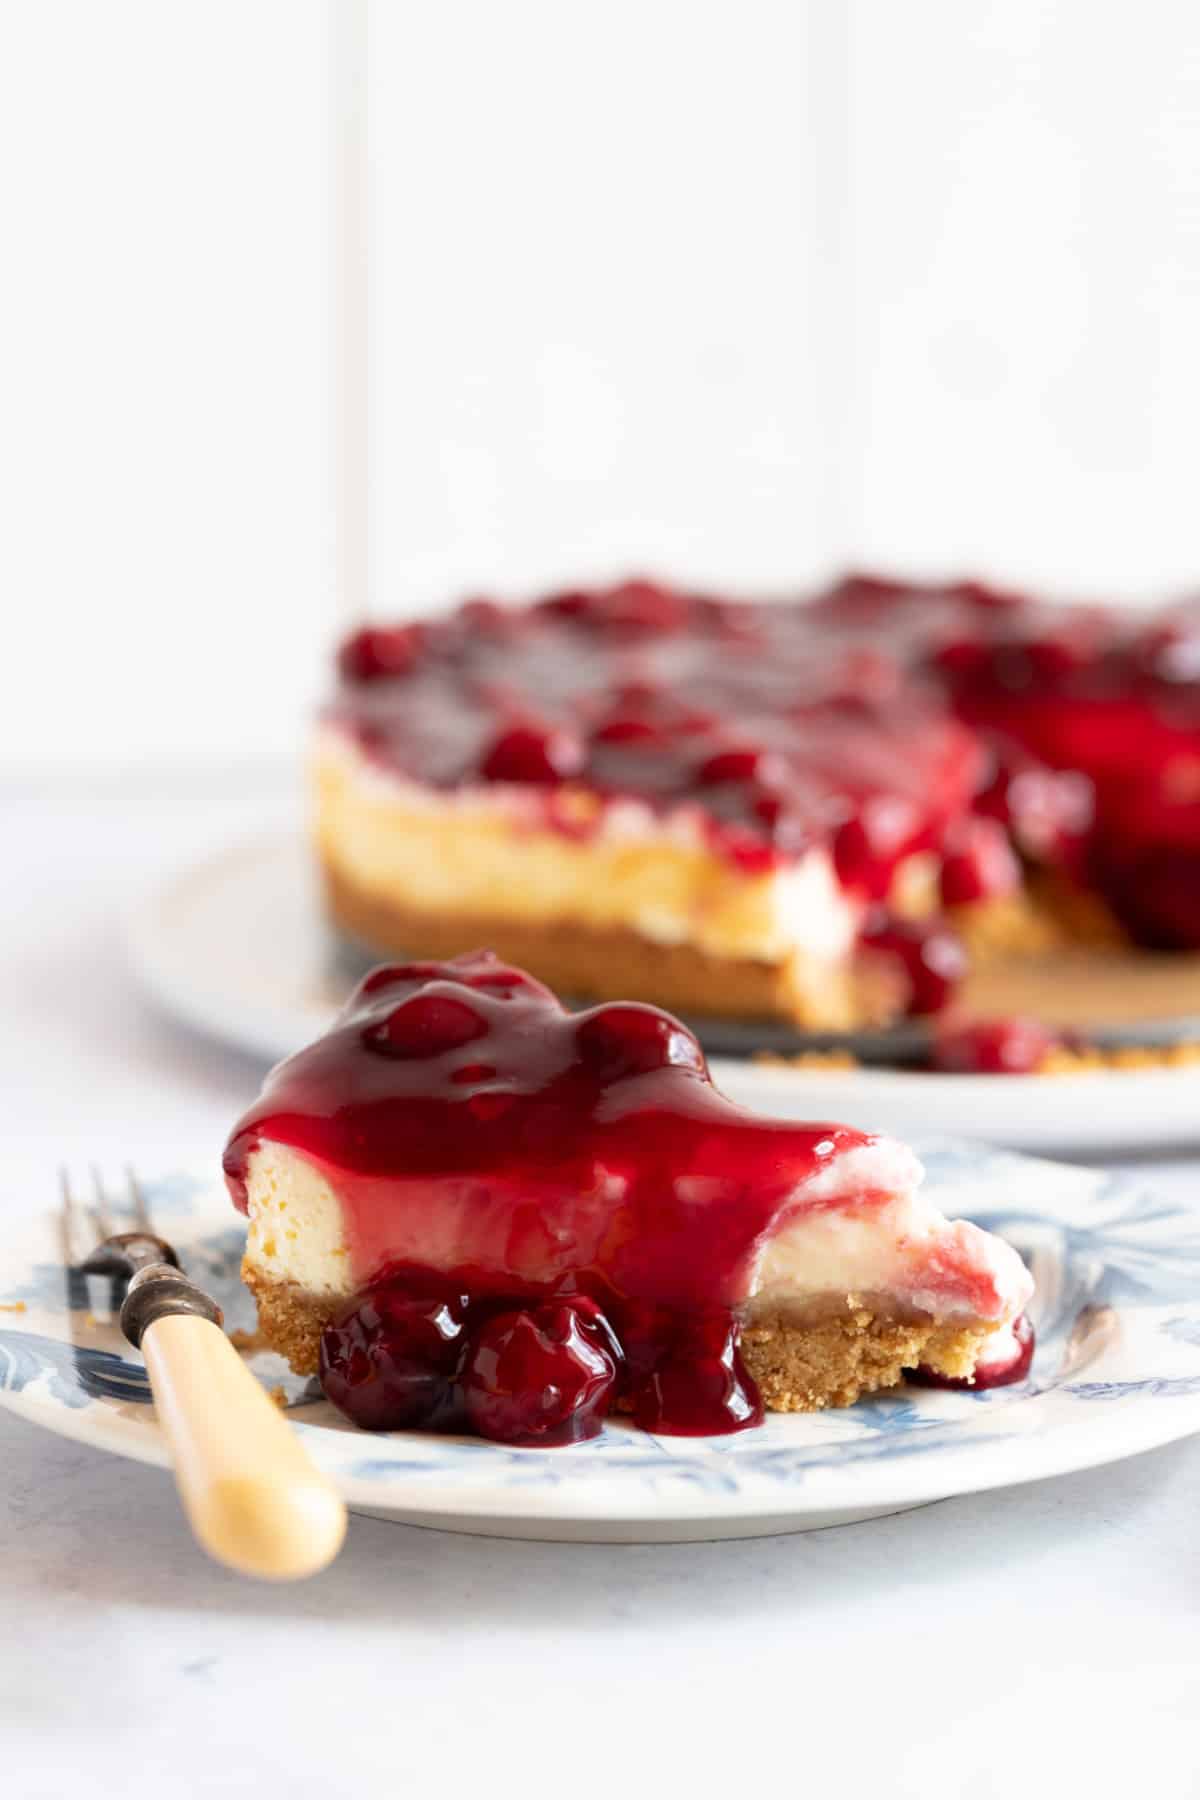 A slice of cherry cheesecake on a dessert plate.